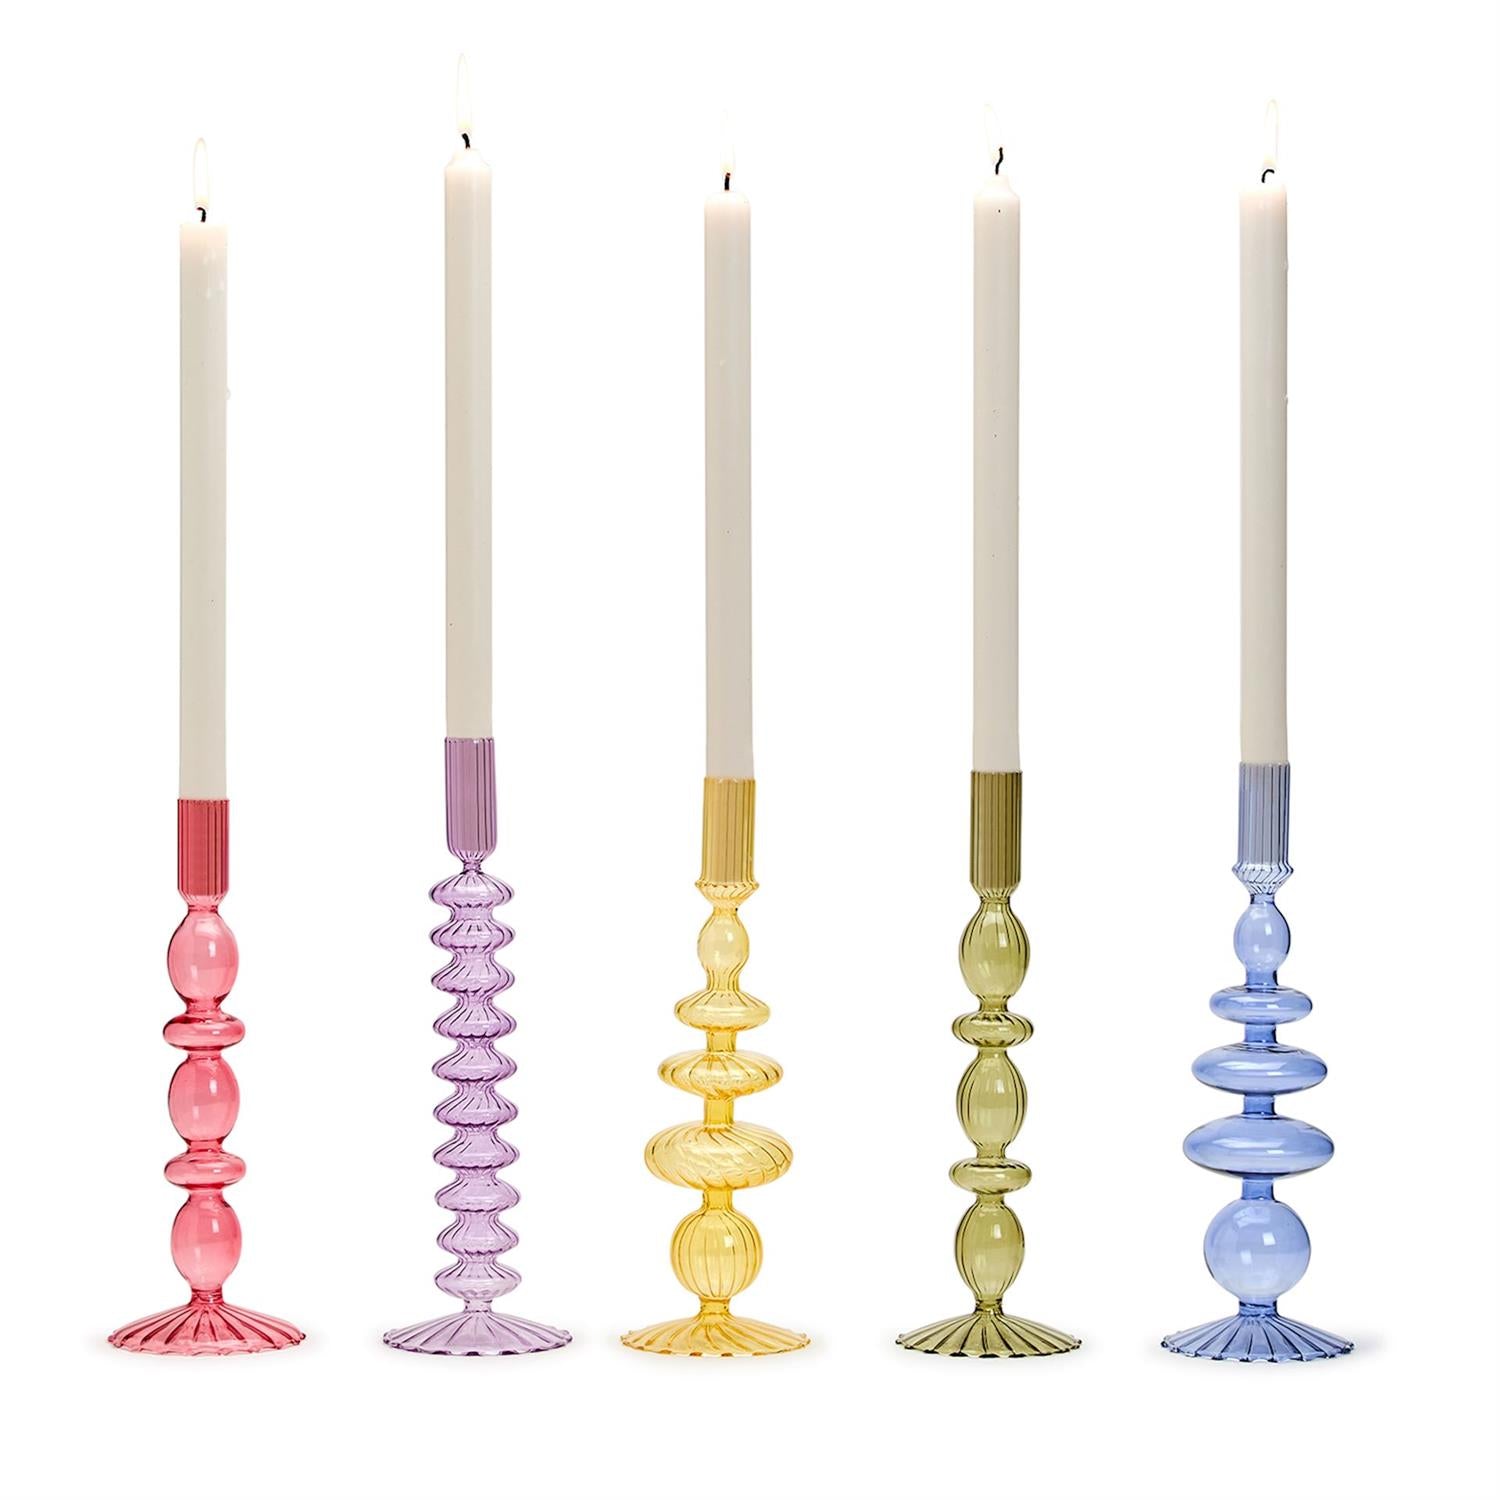 S/5 Hand-Blown Glass Candleholder Incl 5 Colors